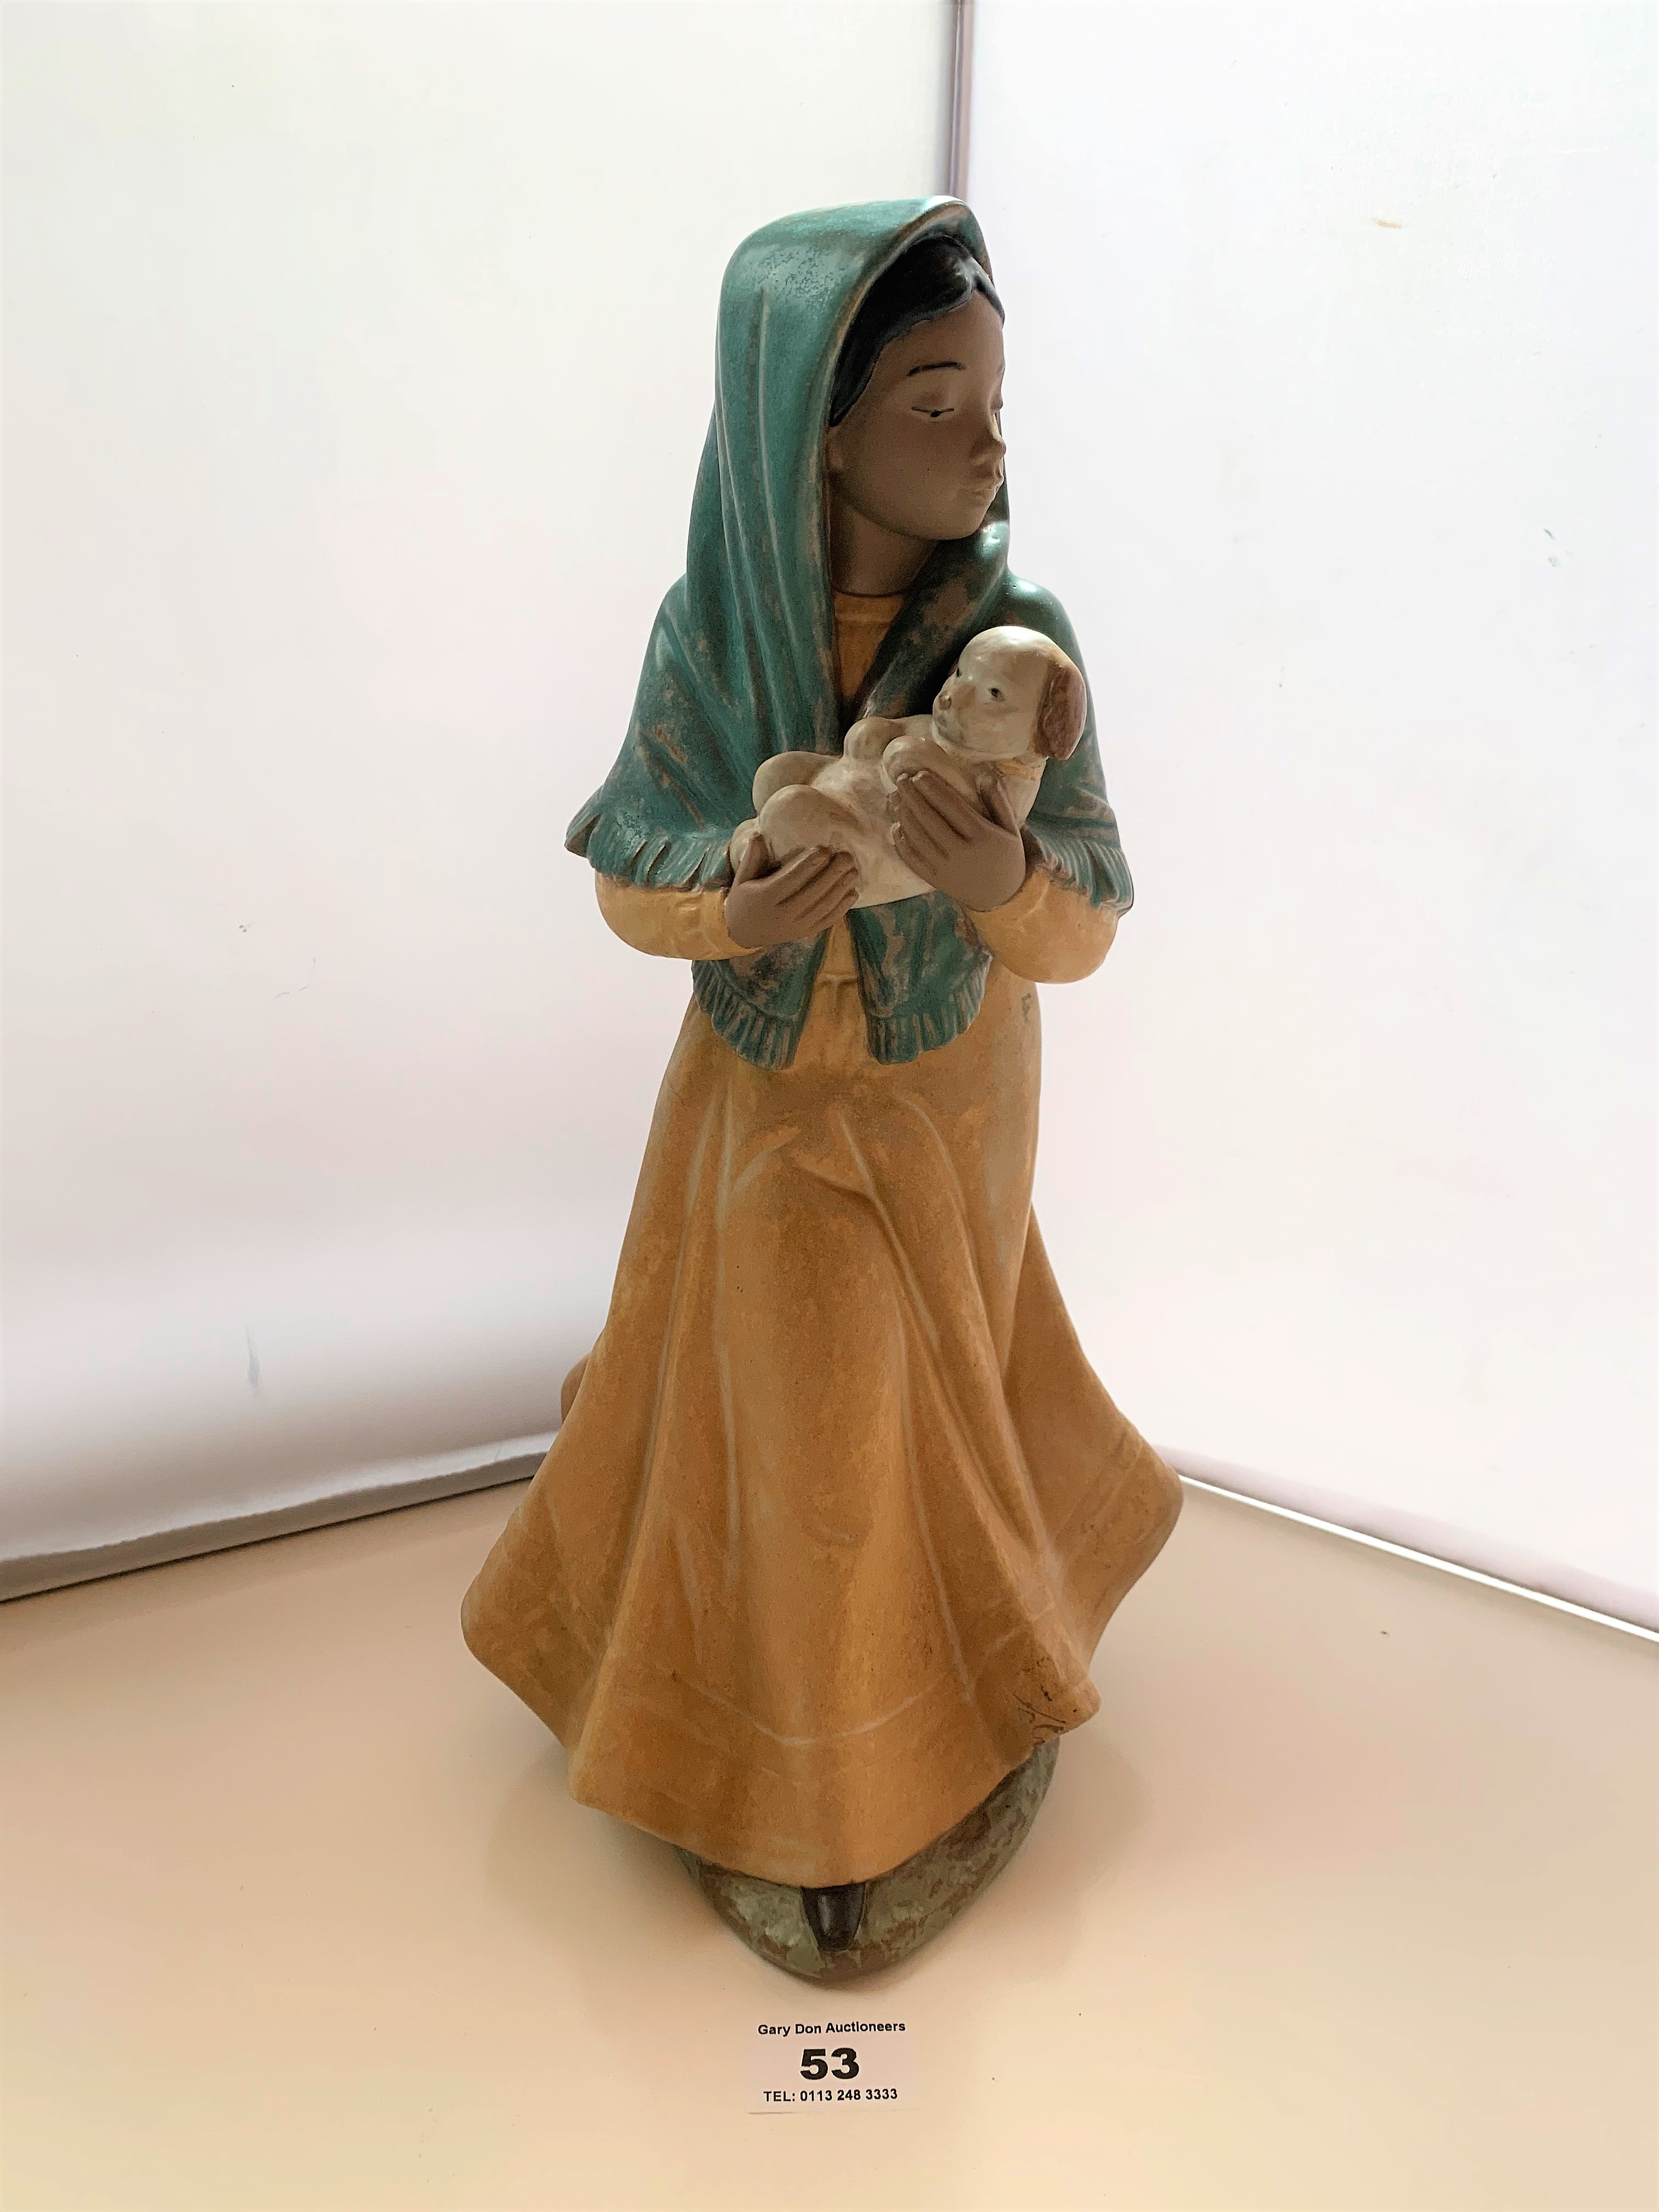 Nao figure of woman with puppy, 13.5” (34cm) high. Matt finish, distressed look. No damage